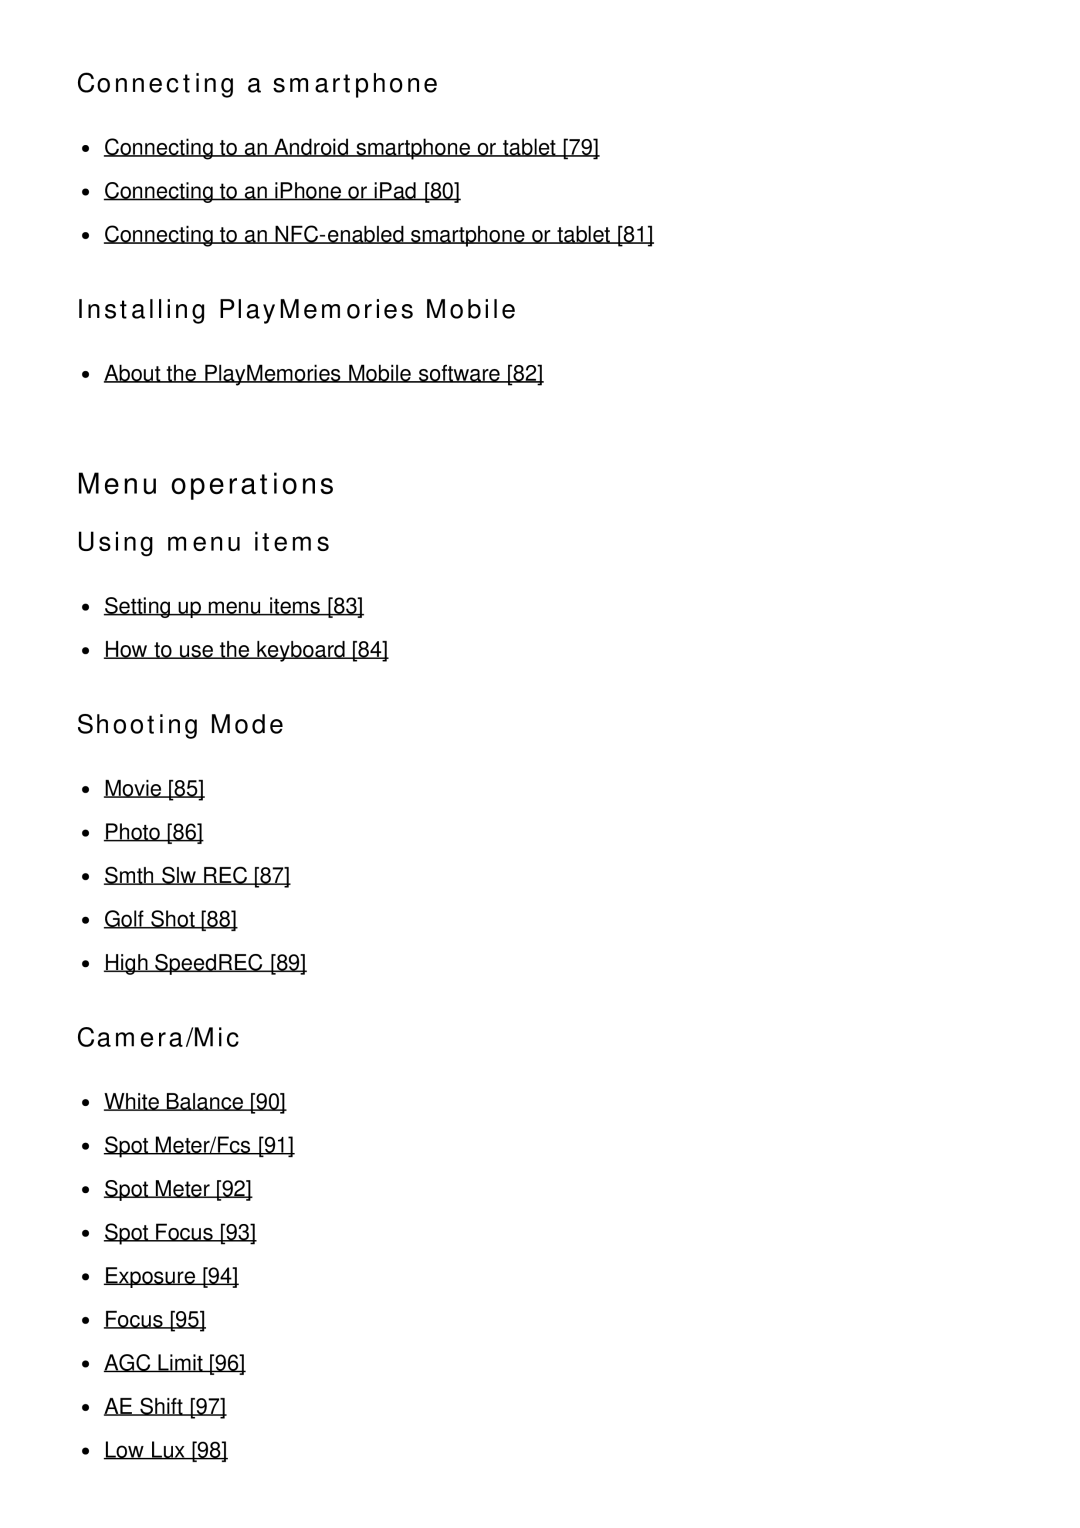 Sony FDR-AX100 Menu operations, Connecting a smartphone, Installing PlayMemories Mobile, Using menu items, Shooting Mode 